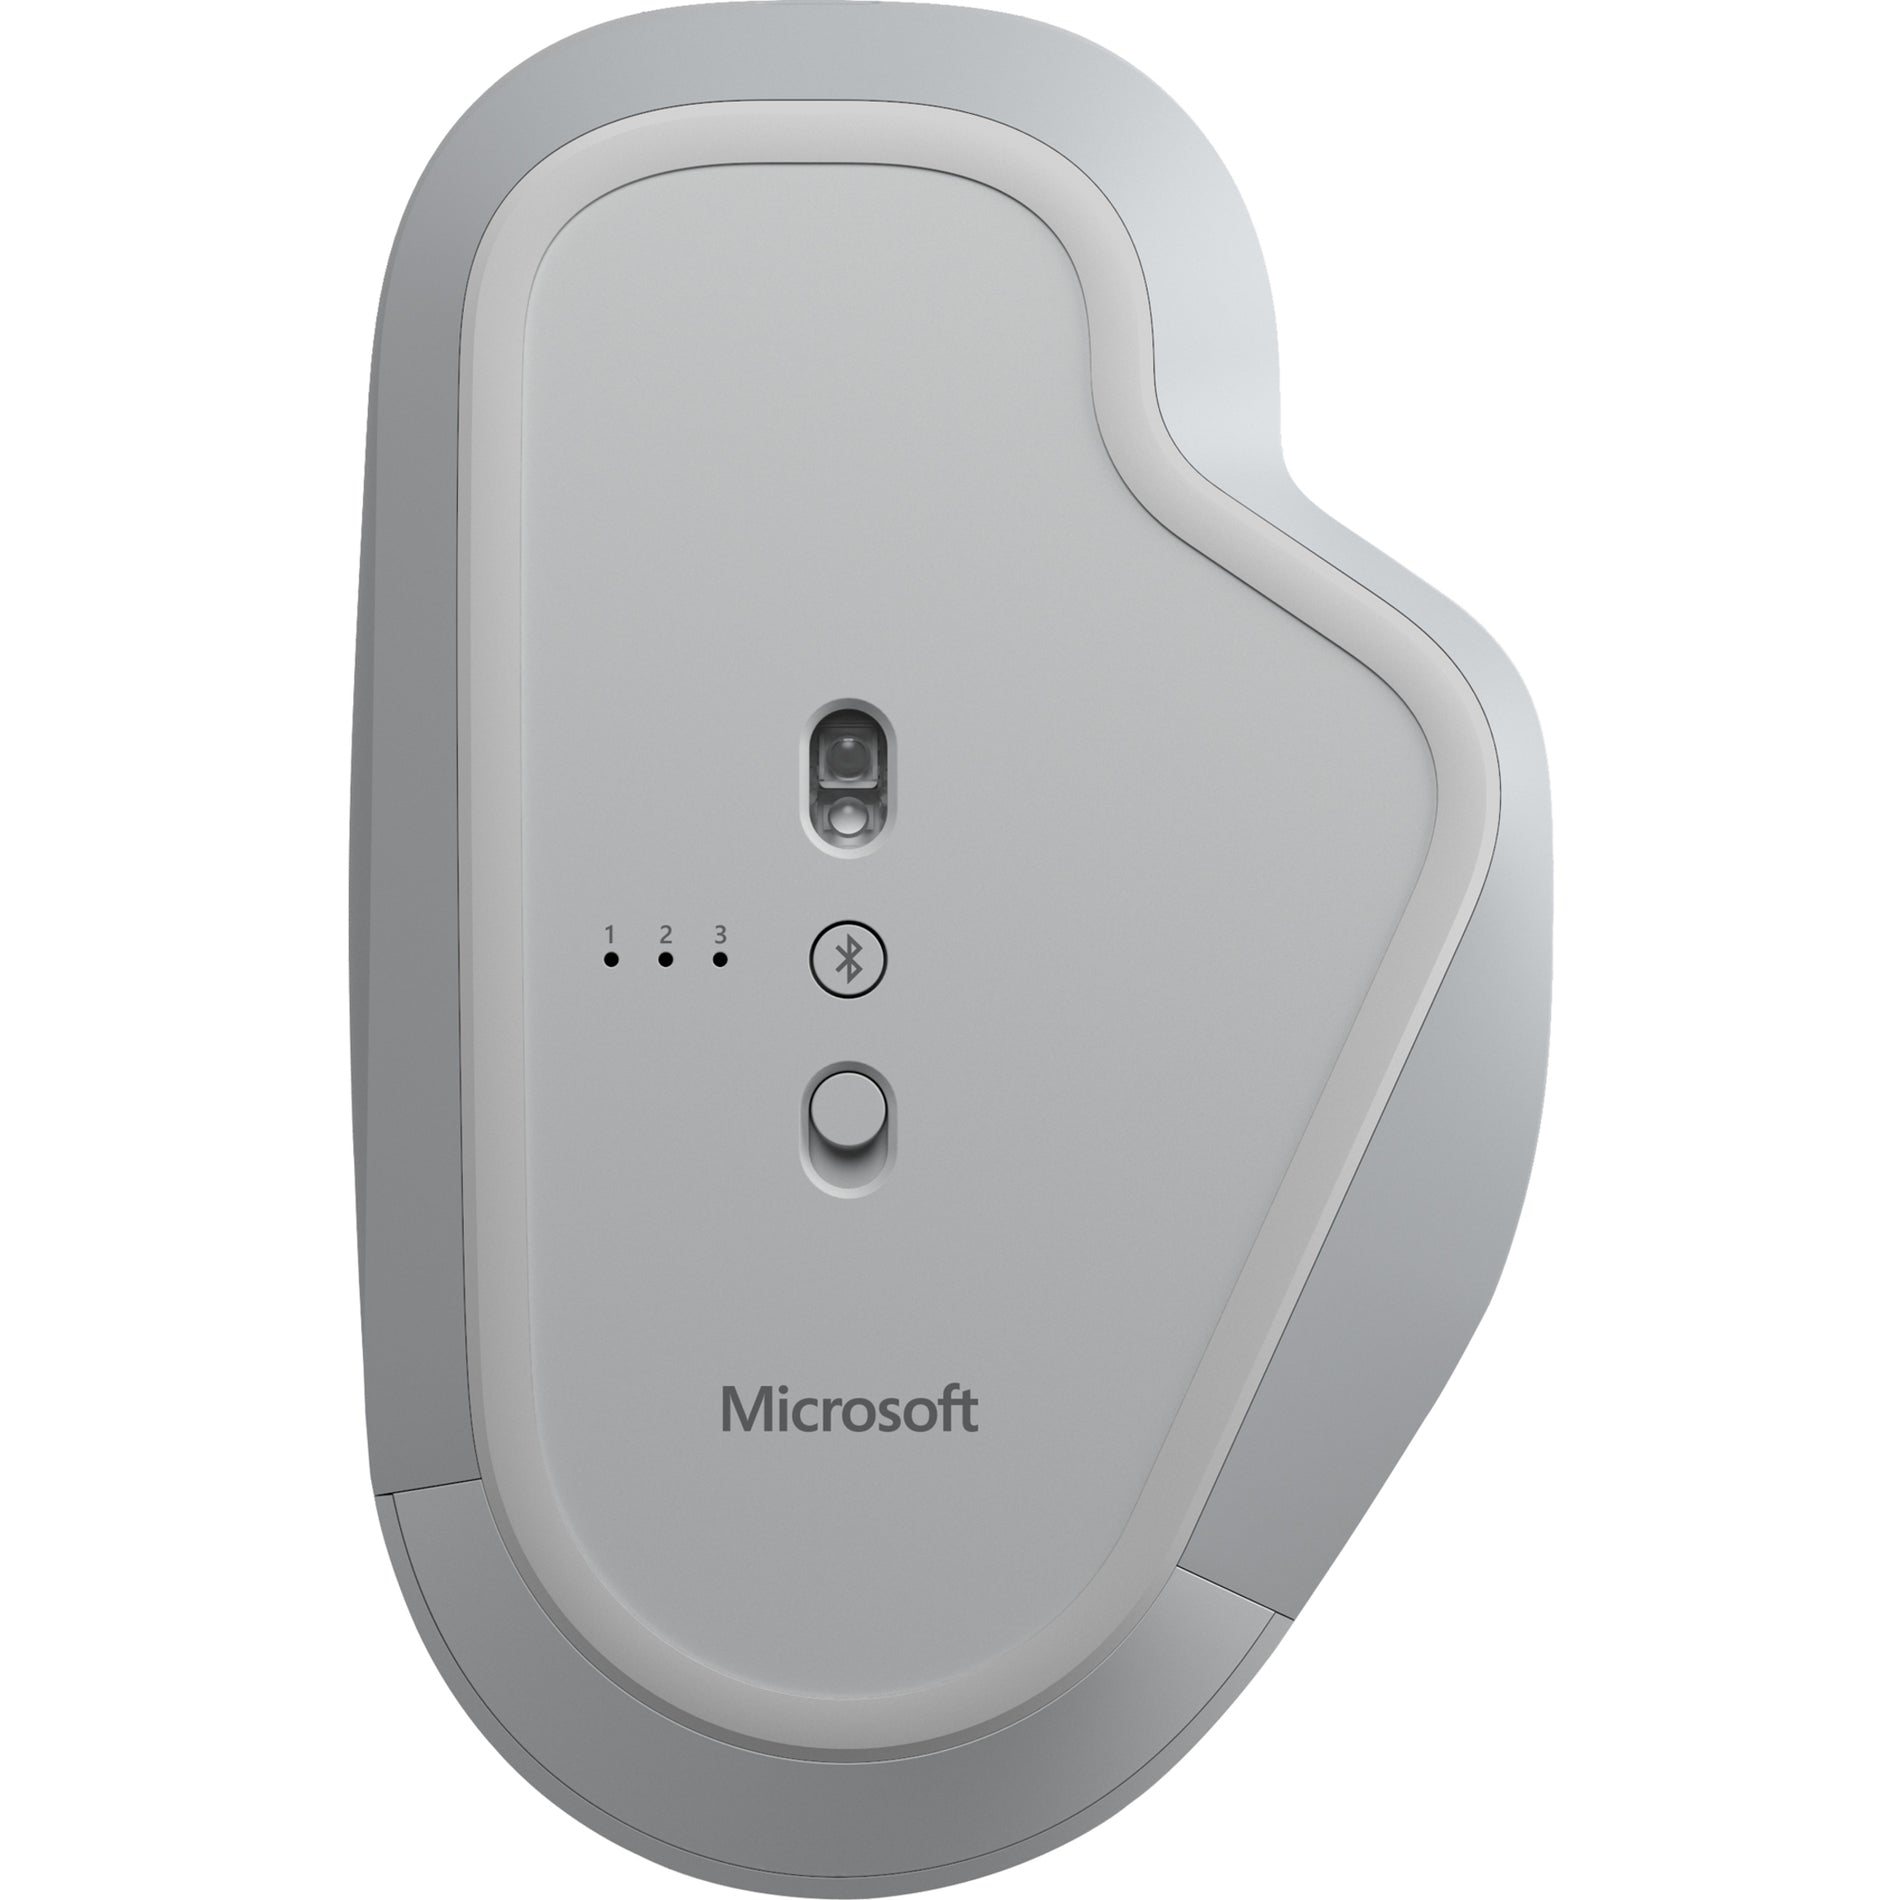 Microsoft FUH-00001 Surface Precision Mouse, Ergonomic Fit, Bluetooth, Gray